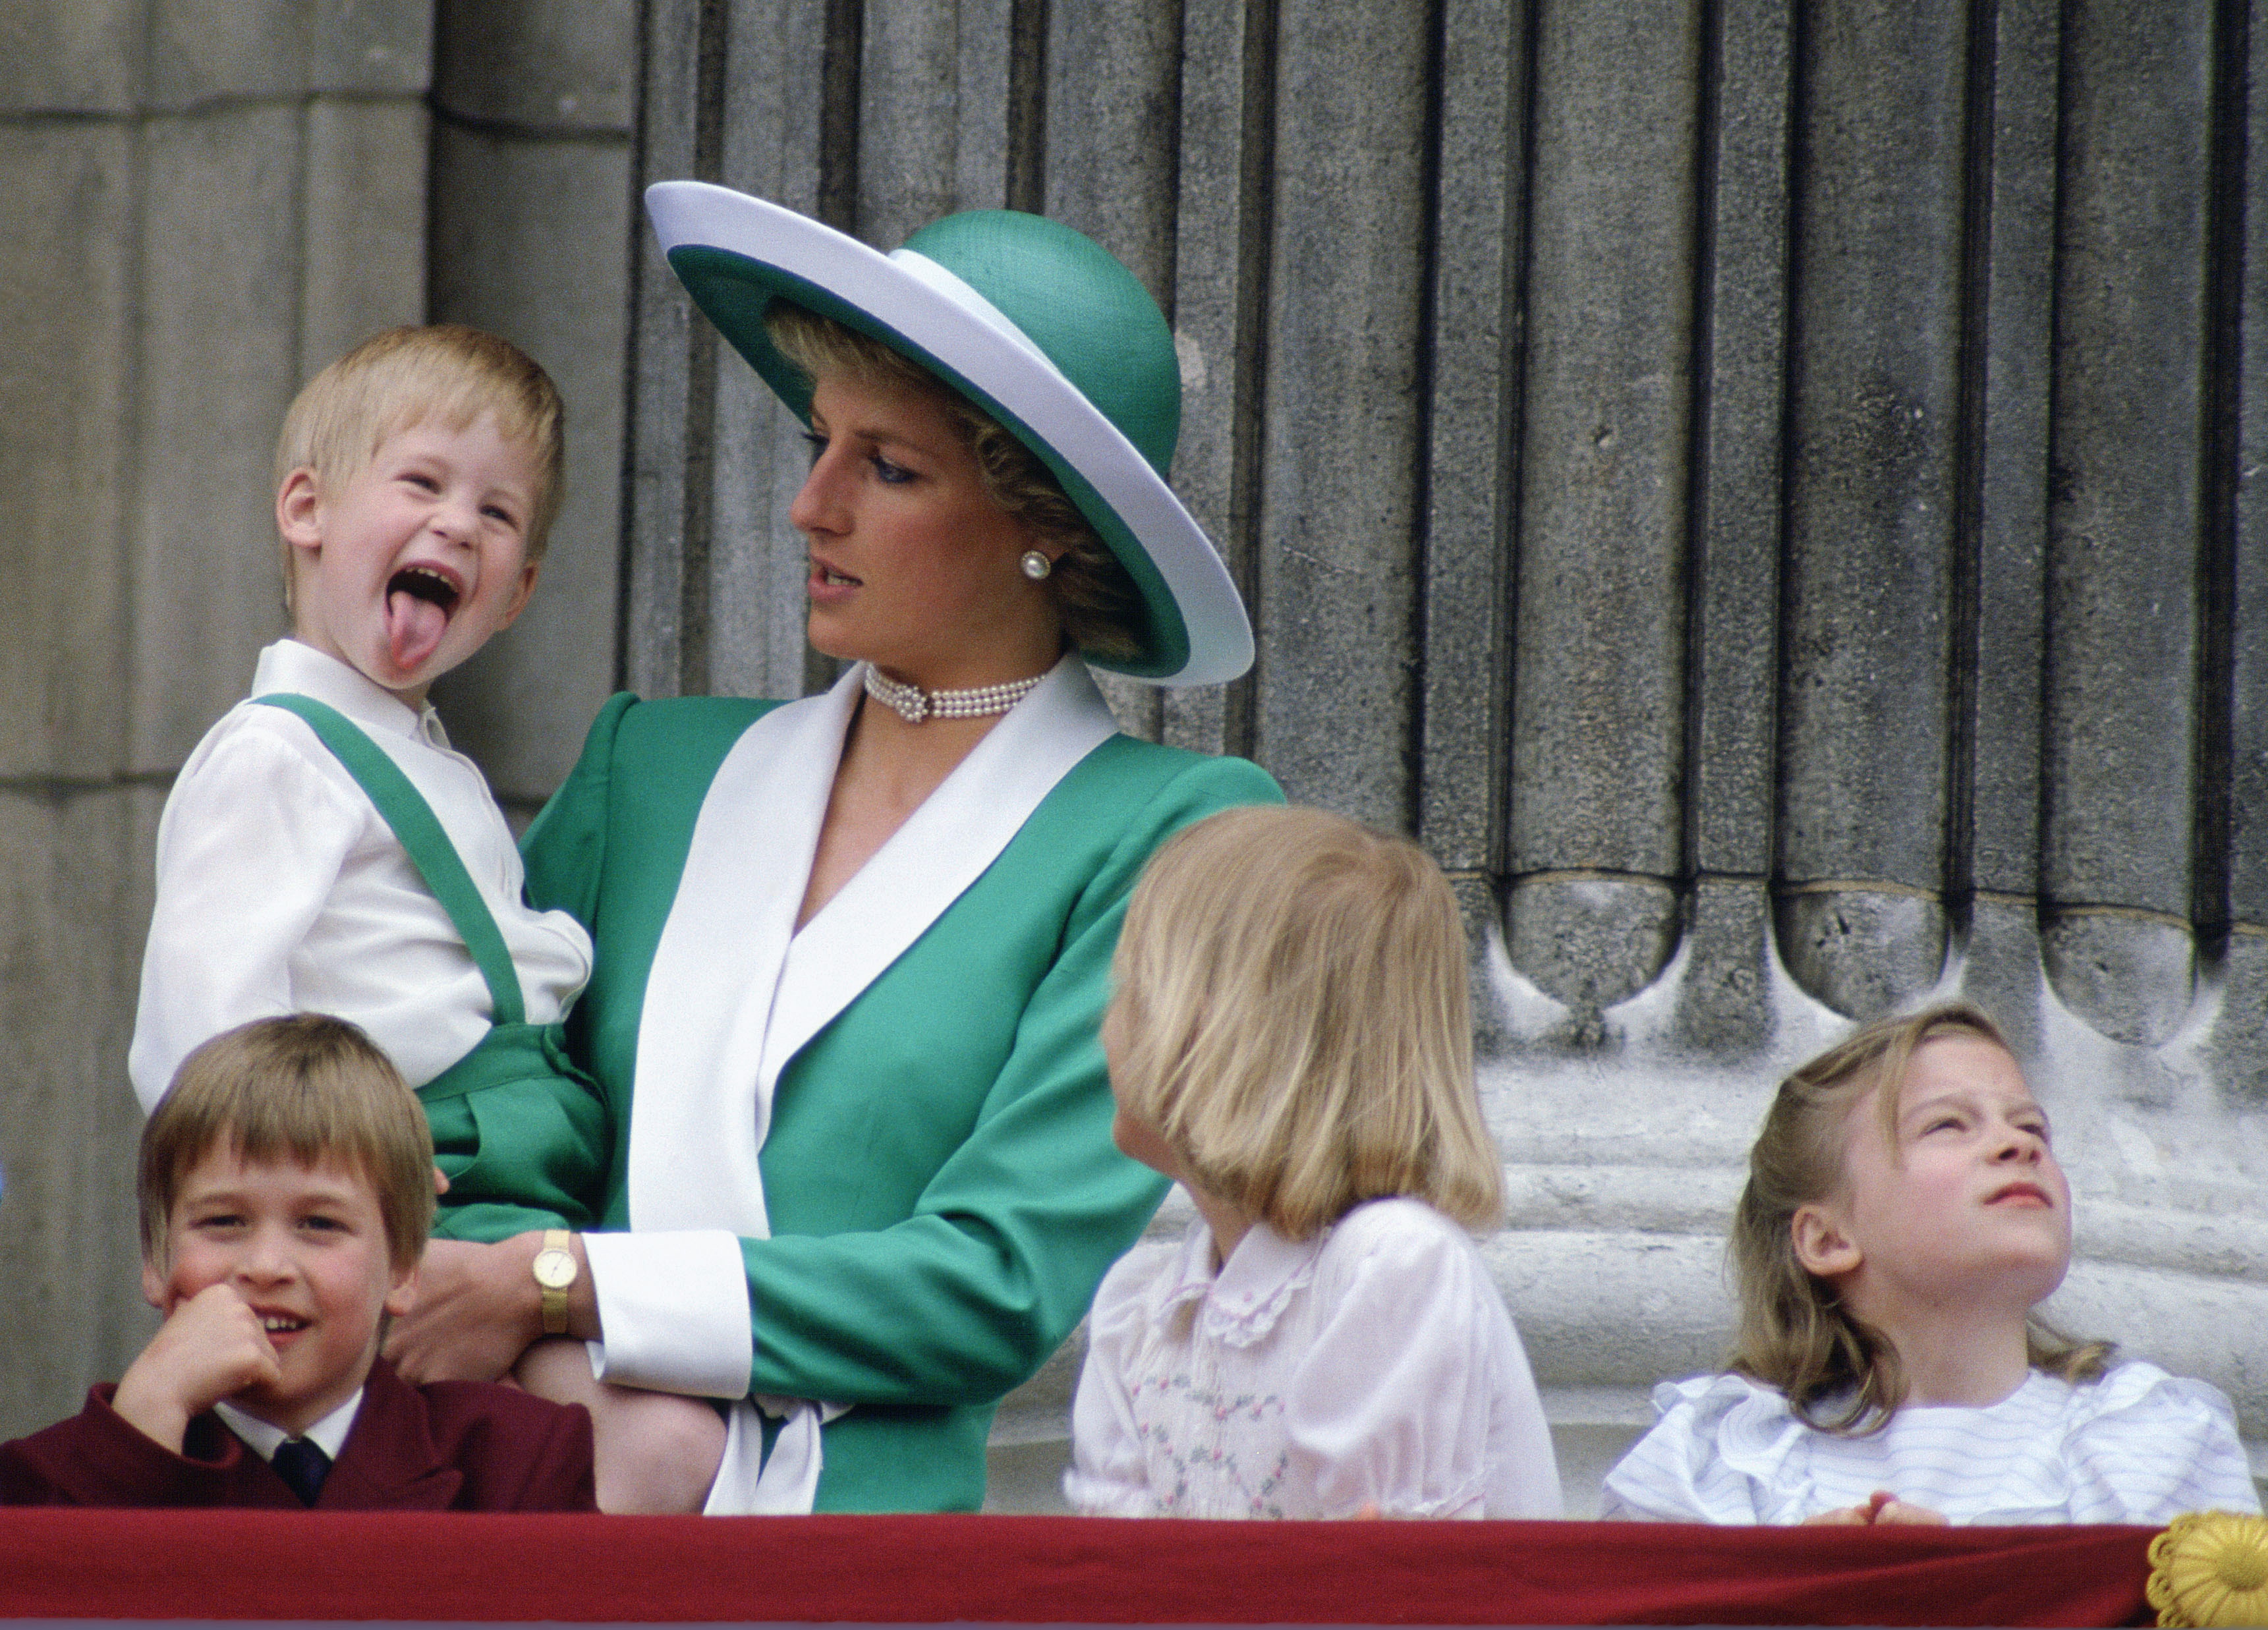 Prince Harry sticks his tongue out at the Trooping The Colour ceremony at Buckingham Palace on June 11, 1988.